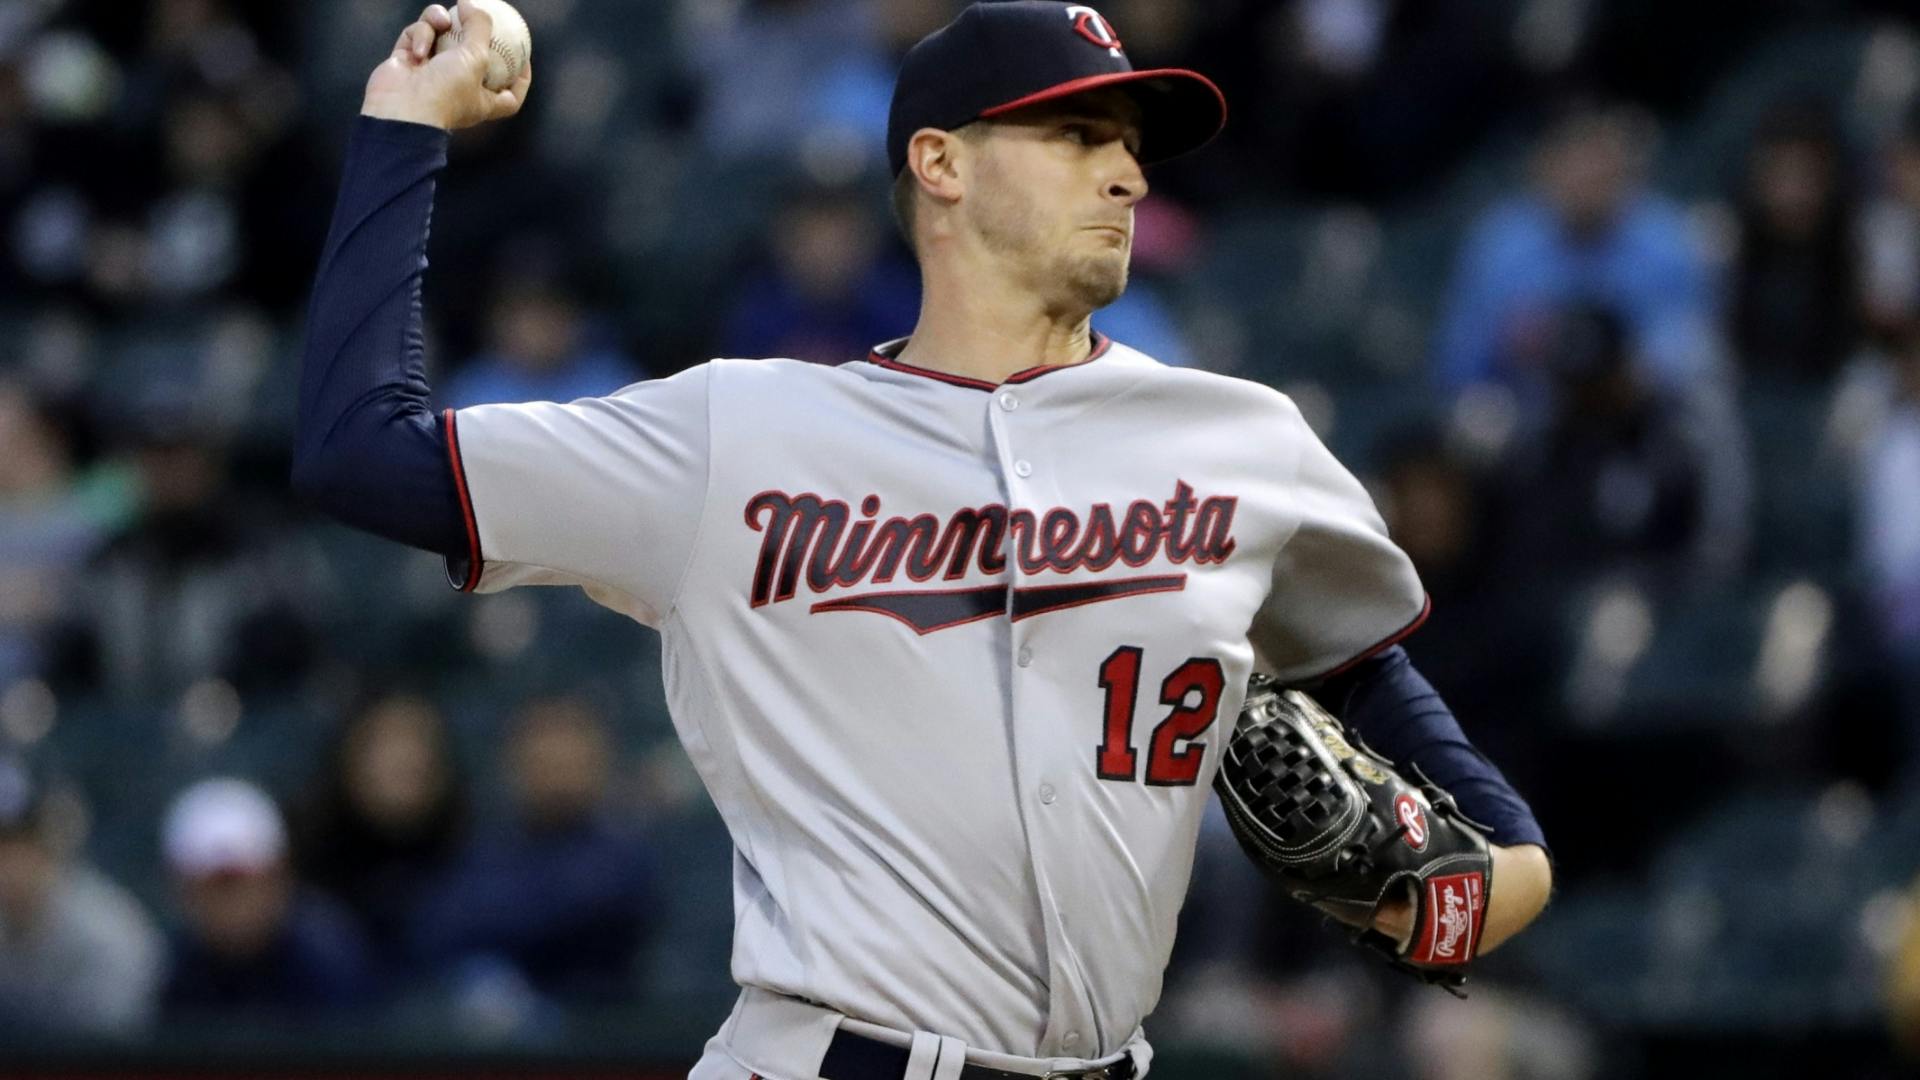 Twins righthander Jake Odorizzi says it was his job to protect the Twins' 5-1 lead Thursday, and by failing to do so, "this falls squarely on my shoulders."